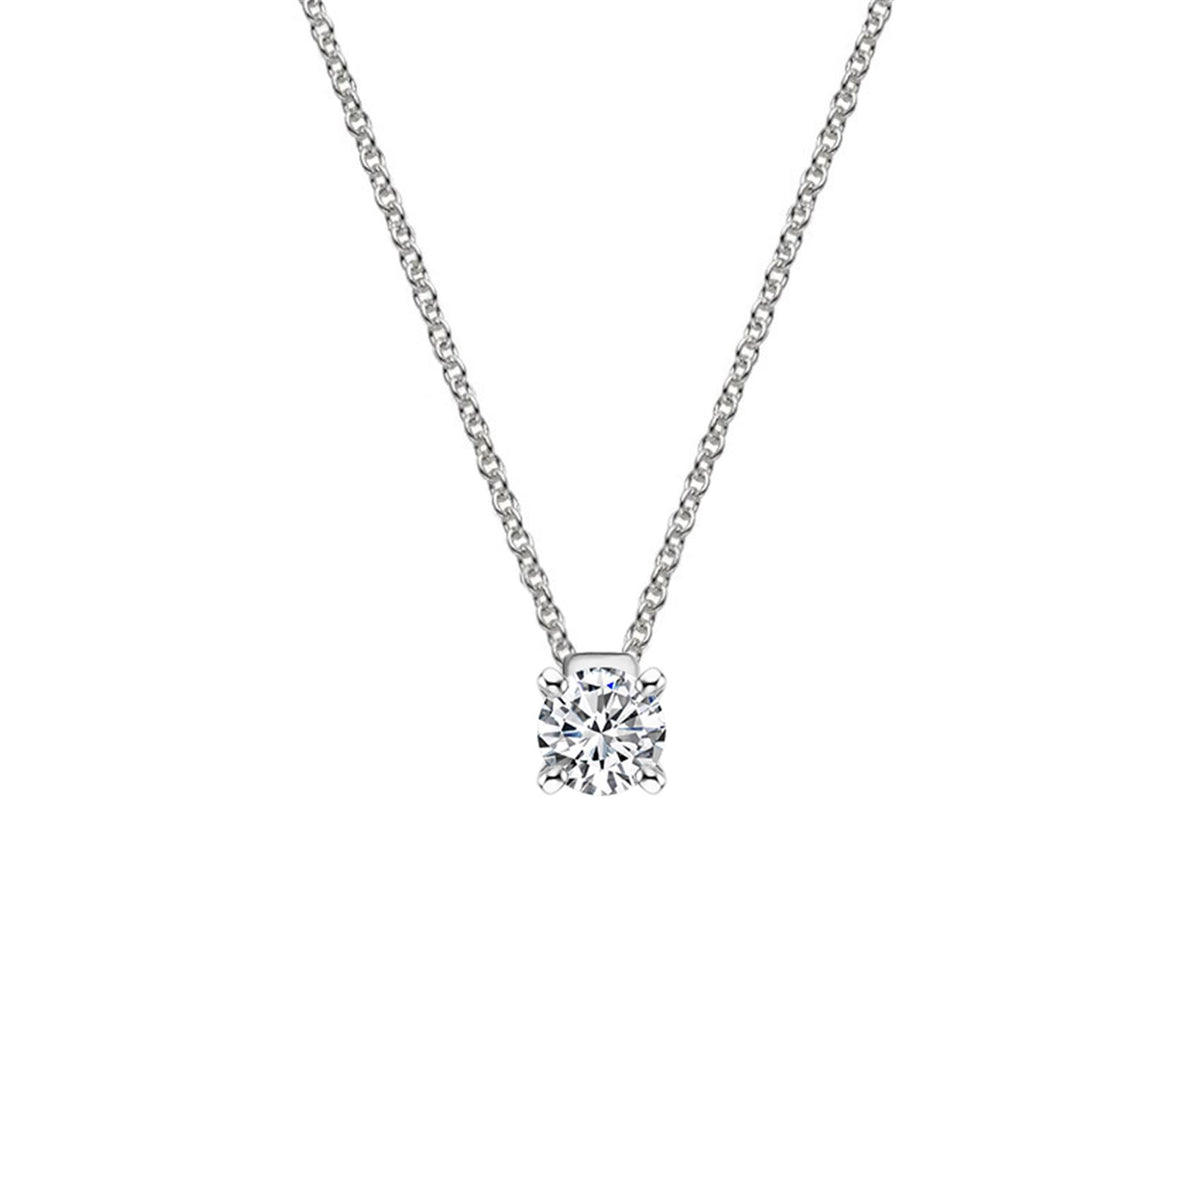 14Kt White Gold Solitaire Pendant With 2.08cttw Lab-Grown Diamonds